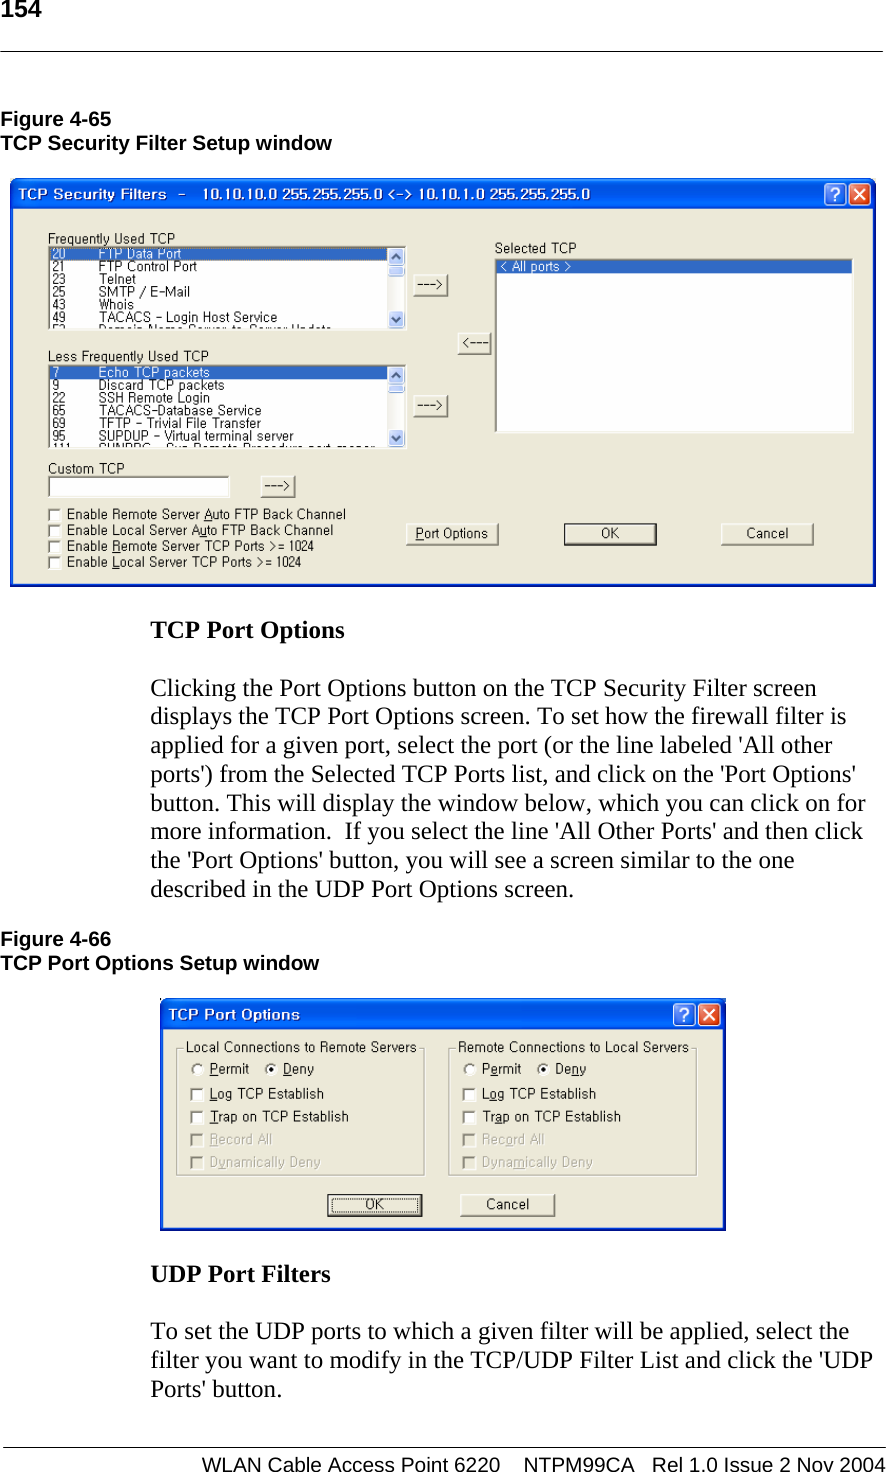   154  WLAN Cable Access Point 6220    NTPM99CA   Rel 1.0 Issue 2 Nov 2004 Figure 4-65 TCP Security Filter Setup window    TCP Port Options   Clicking the Port Options button on the TCP Security Filter screen displays the TCP Port Options screen. To set how the firewall filter is applied for a given port, select the port (or the line labeled &apos;All other ports&apos;) from the Selected TCP Ports list, and click on the &apos;Port Options&apos; button. This will display the window below, which you can click on for more information.  If you select the line &apos;All Other Ports&apos; and then click the &apos;Port Options&apos; button, you will see a screen similar to the one described in the UDP Port Options screen.  Figure 4-66 TCP Port Options Setup window    UDP Port Filters   To set the UDP ports to which a given filter will be applied, select the filter you want to modify in the TCP/UDP Filter List and click the &apos;UDP Ports&apos; button.   